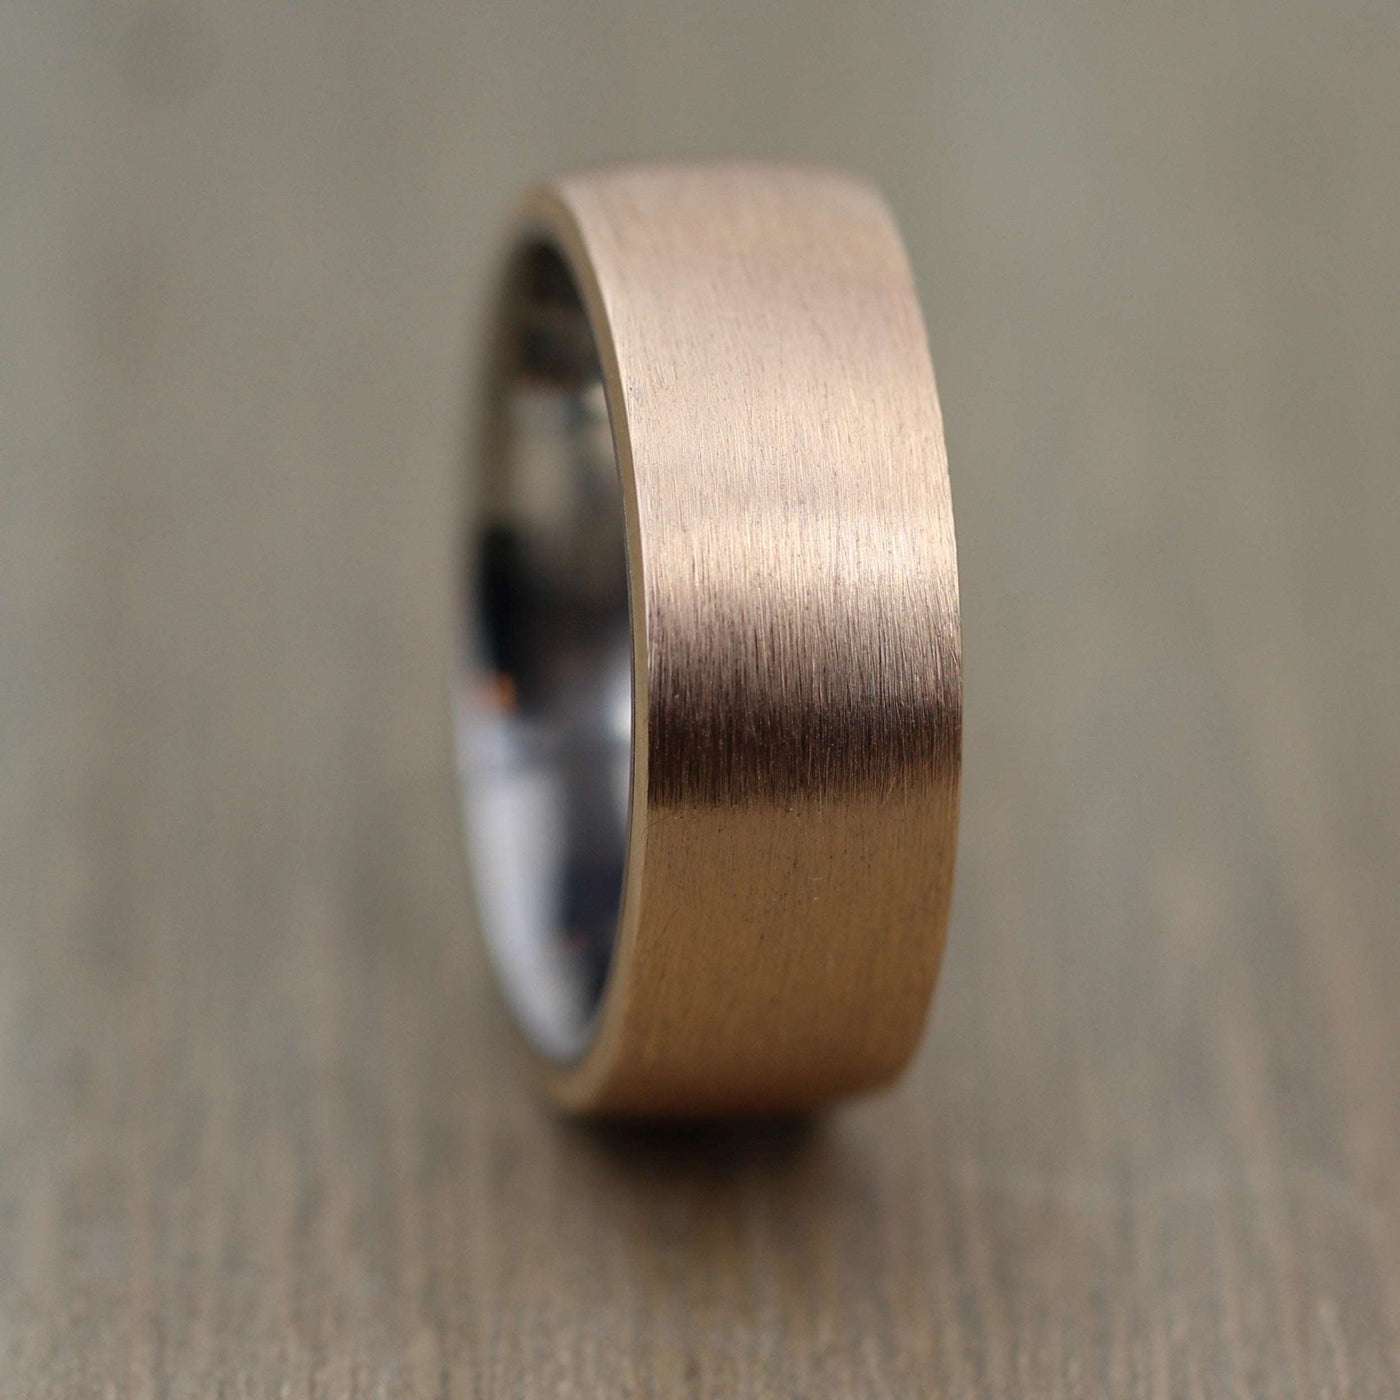  Bronze wedding ring band. mans bronze and titanium ring. bronze wedding ring band uk